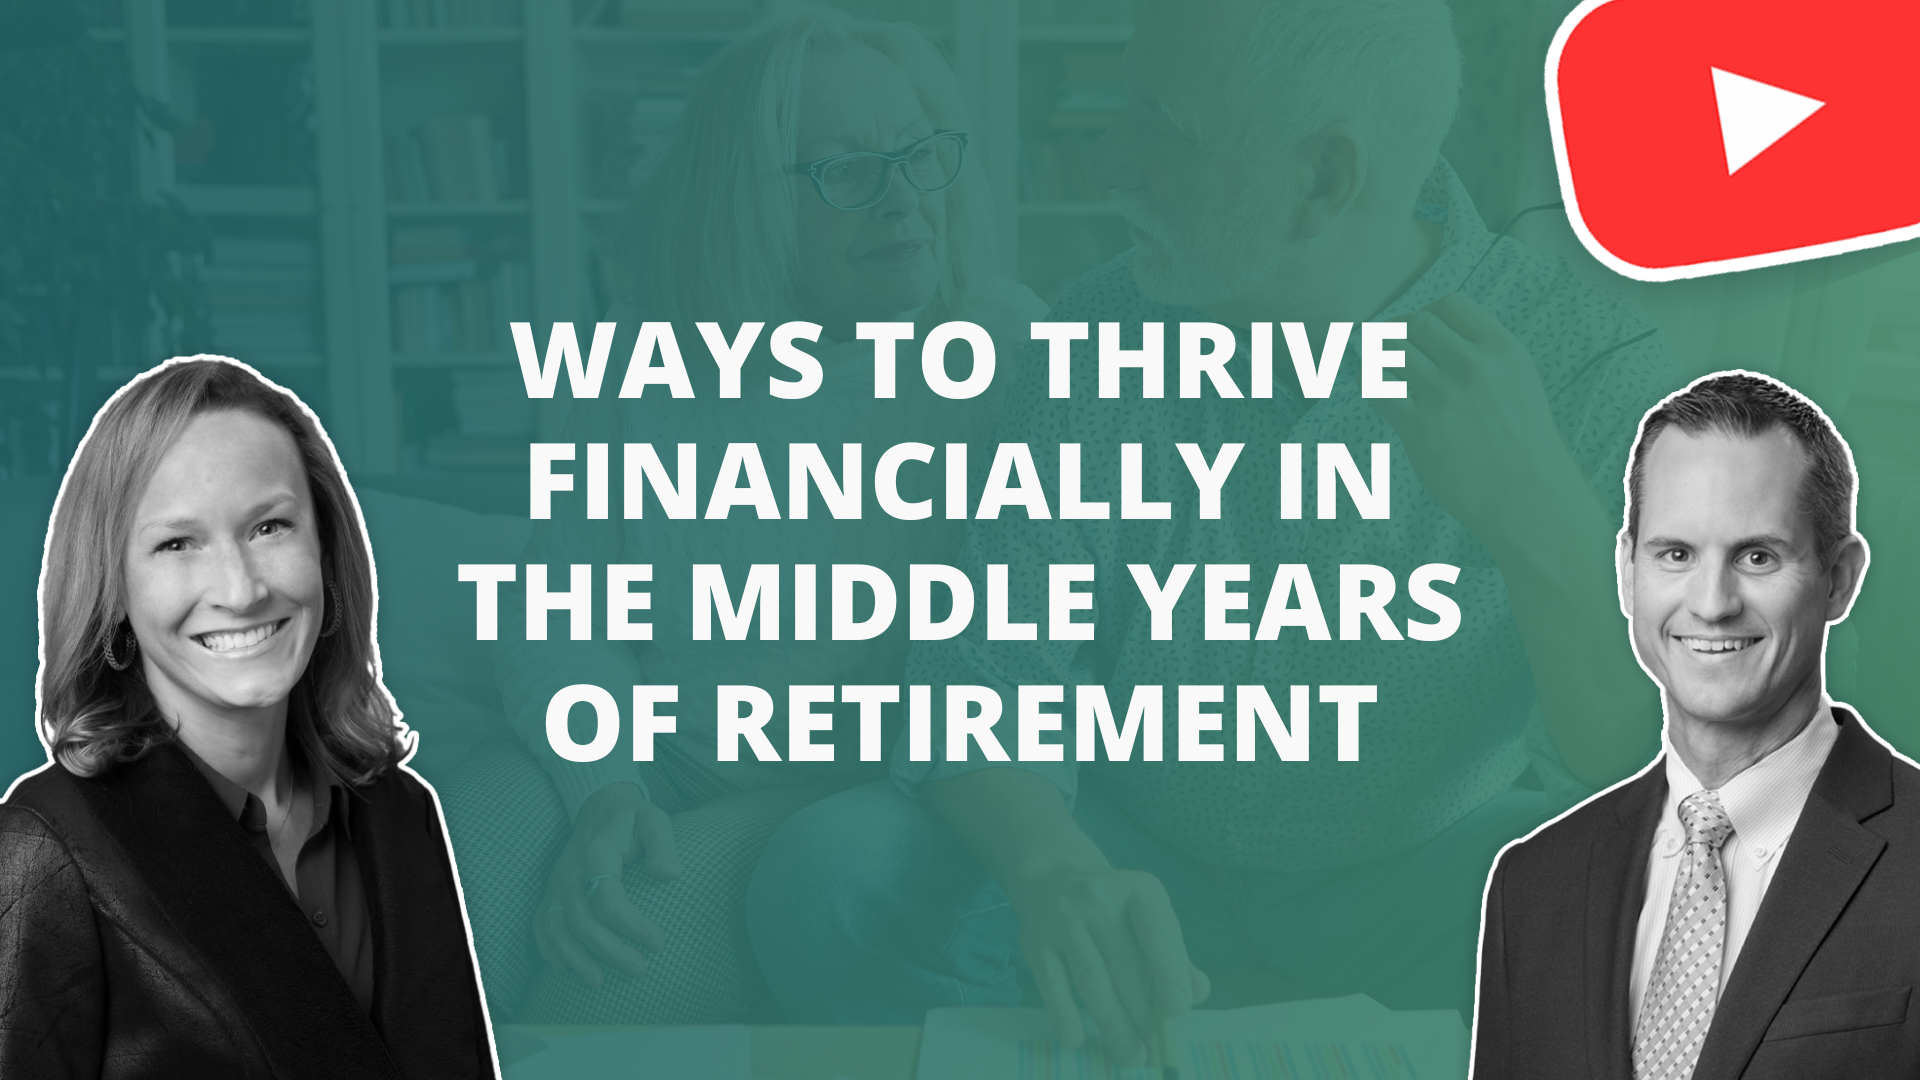 Ways to thrive financially in the middle years of retirement